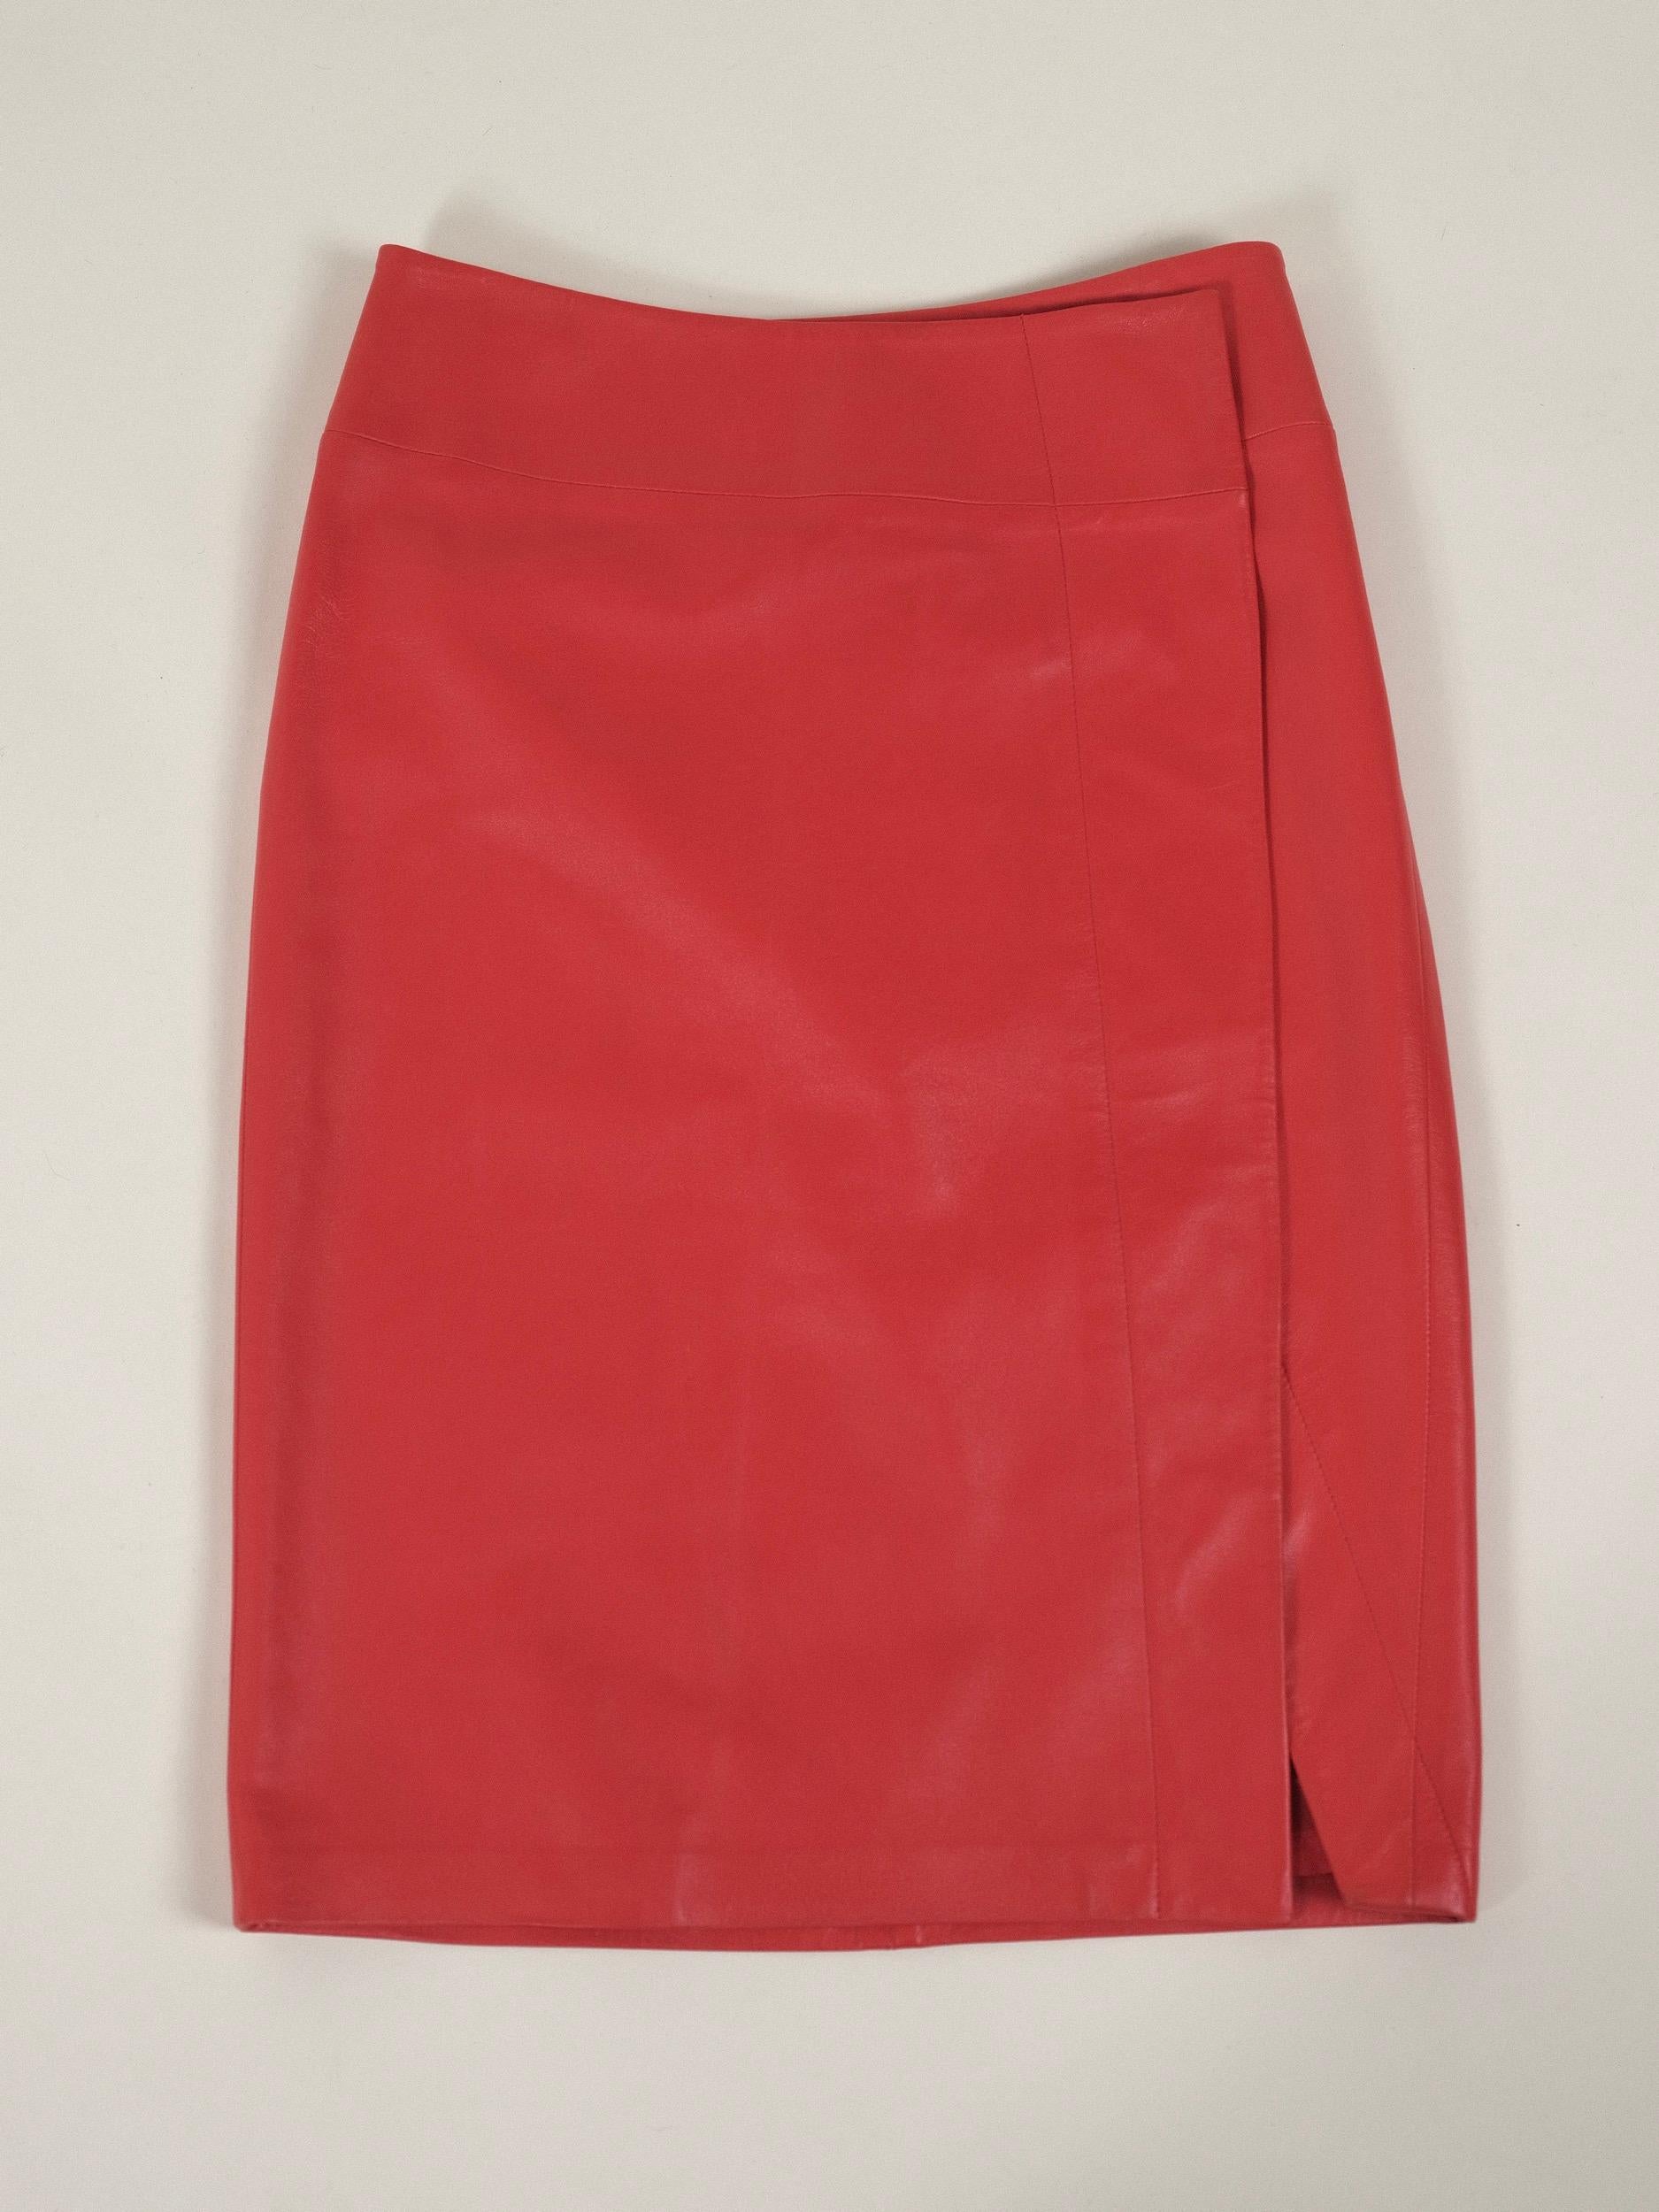 Donna Karan Leather Wrap Skirt Tomato Red Size US4 IT40 FR38 1990's For Sale 7